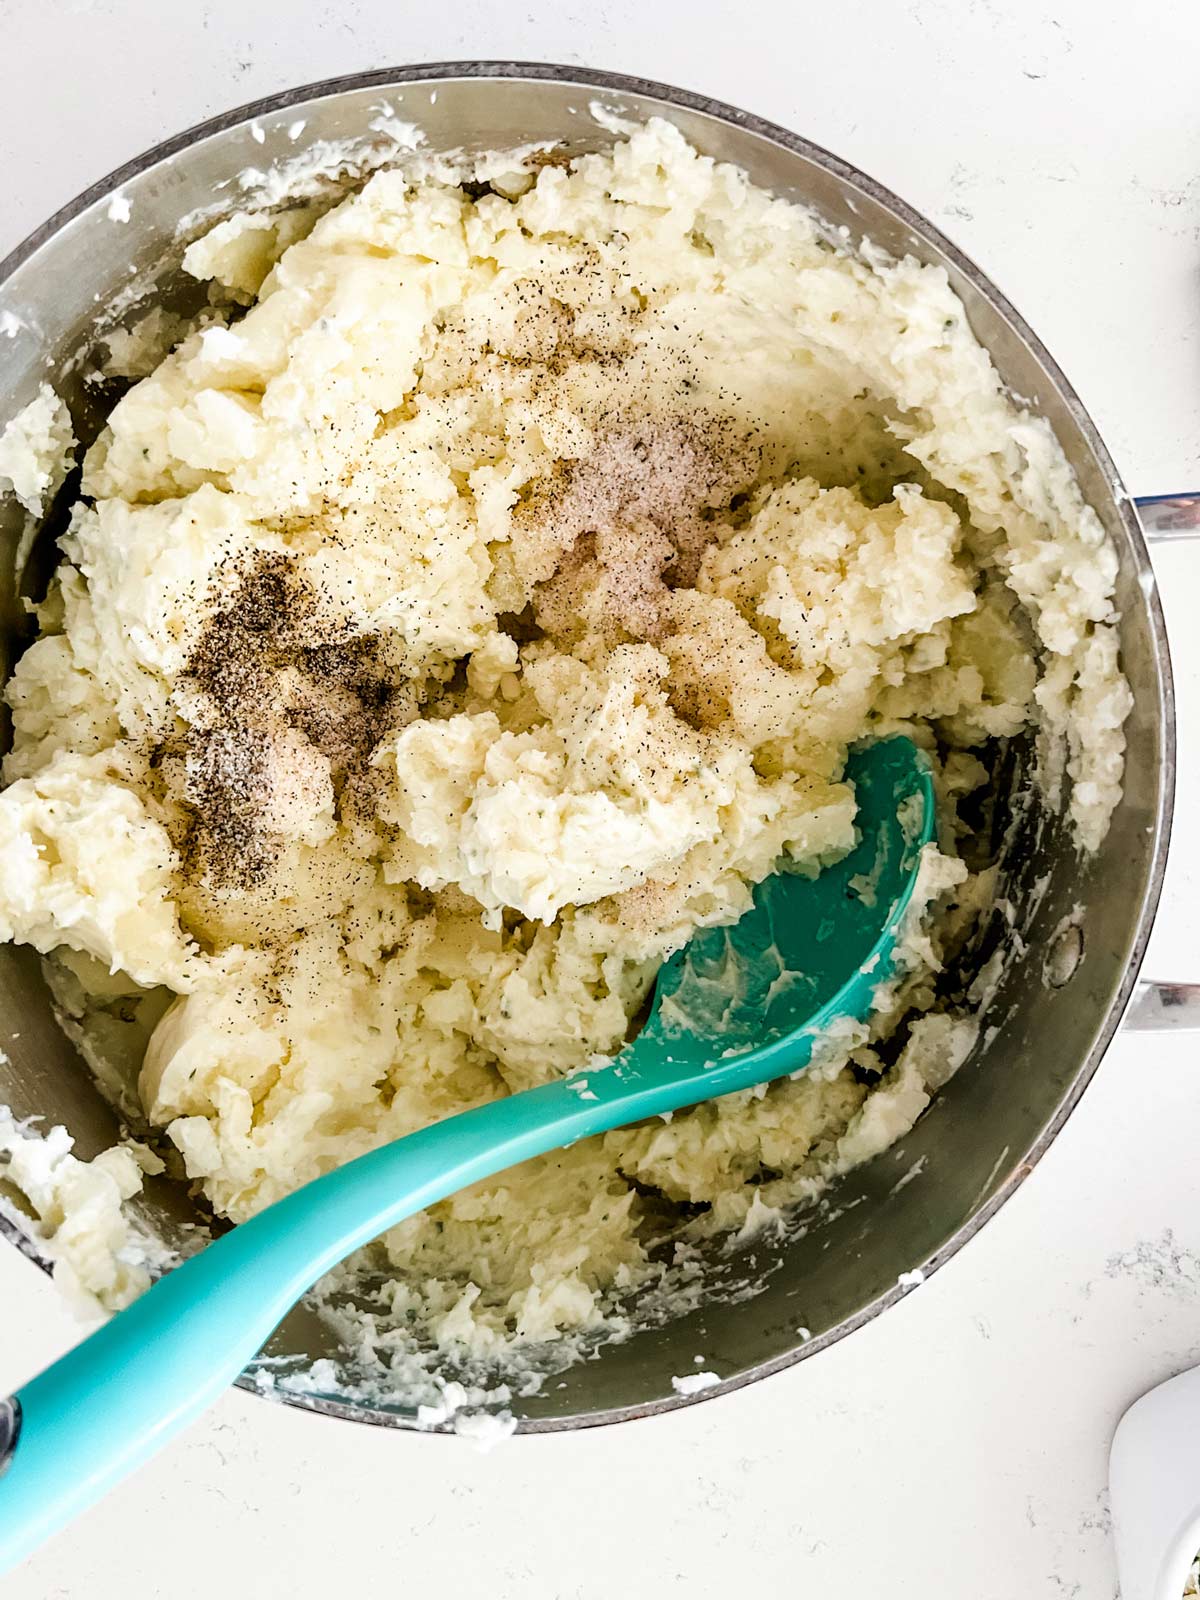 A spoon stiring together a bowl of Boursin mashed potatoes.